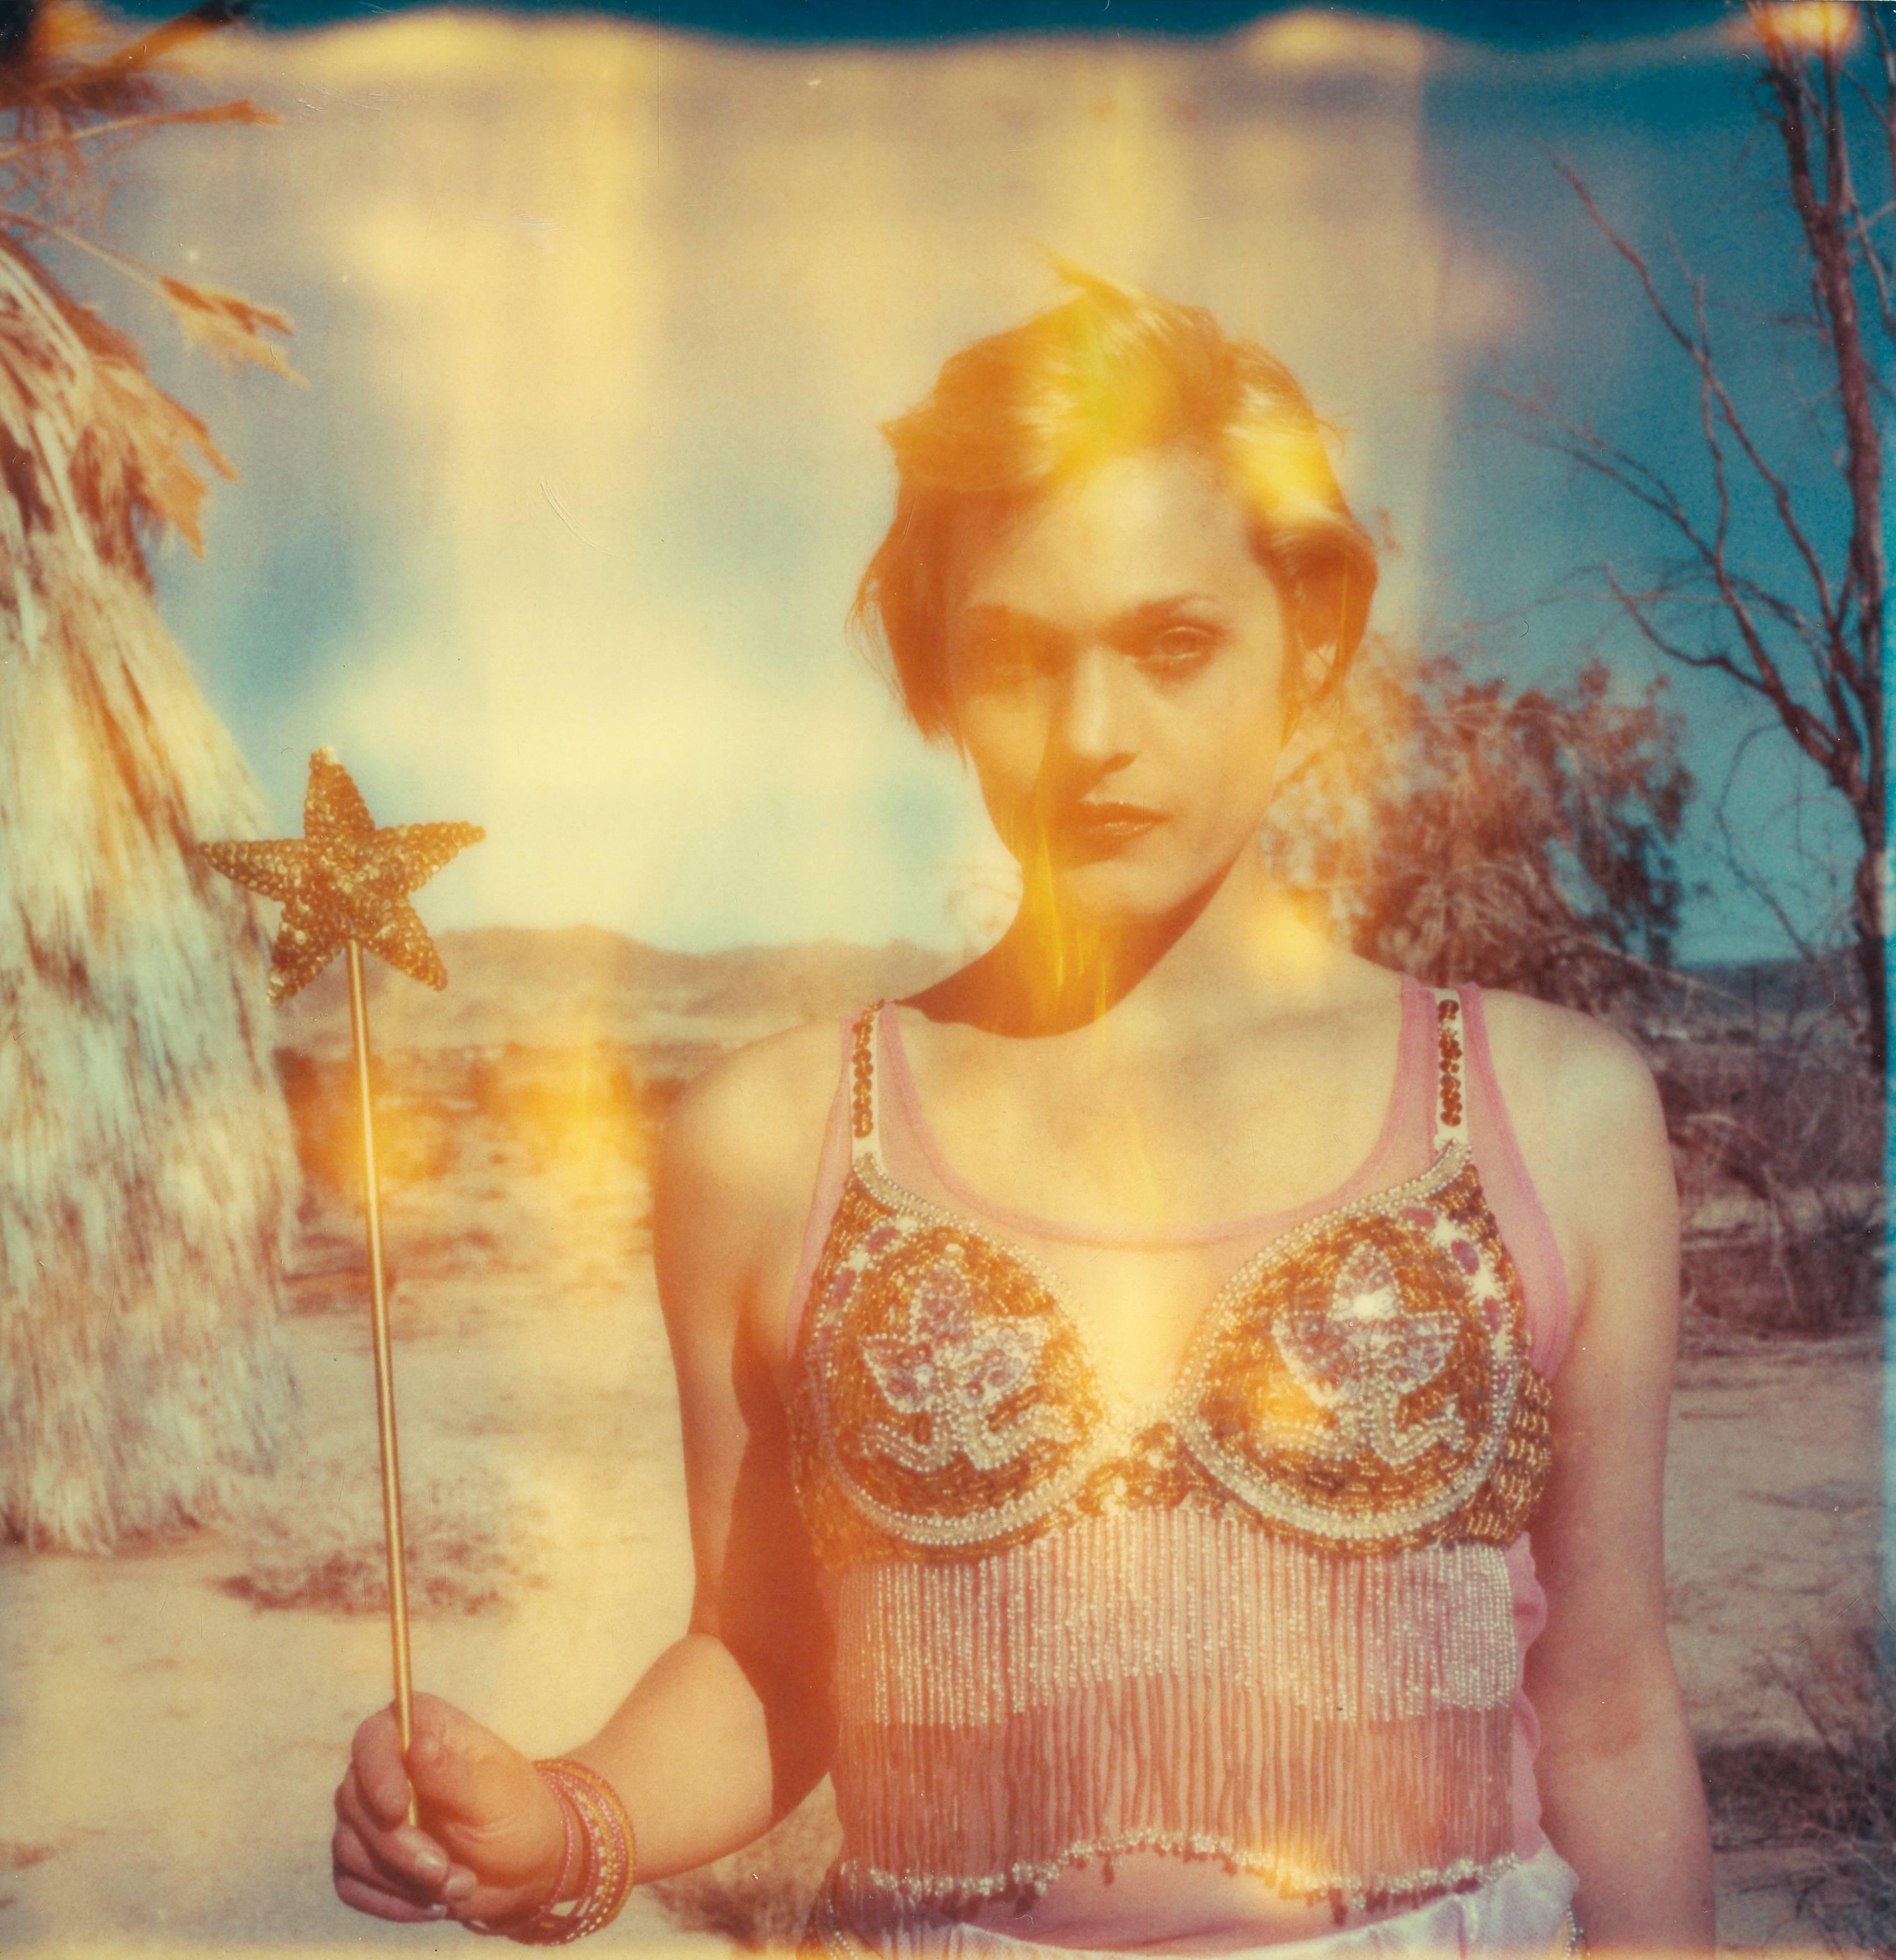 Stefanie Schneider Color Photograph - The Muse (29 Palms, CA) - analog, mounted - Polaroid, 21st Century, Contemporary